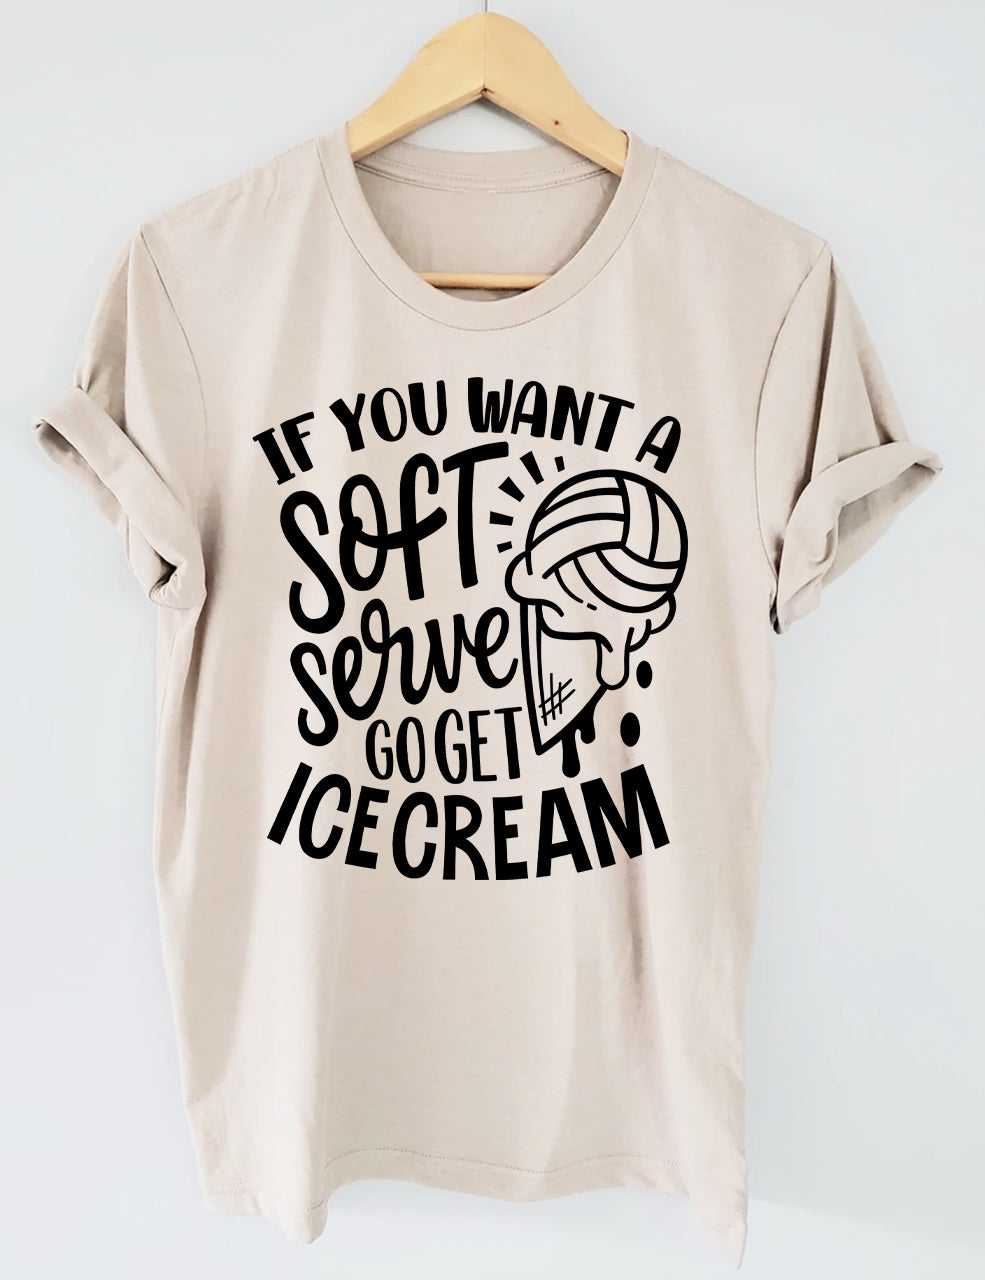 Volleyball Game T-shirt